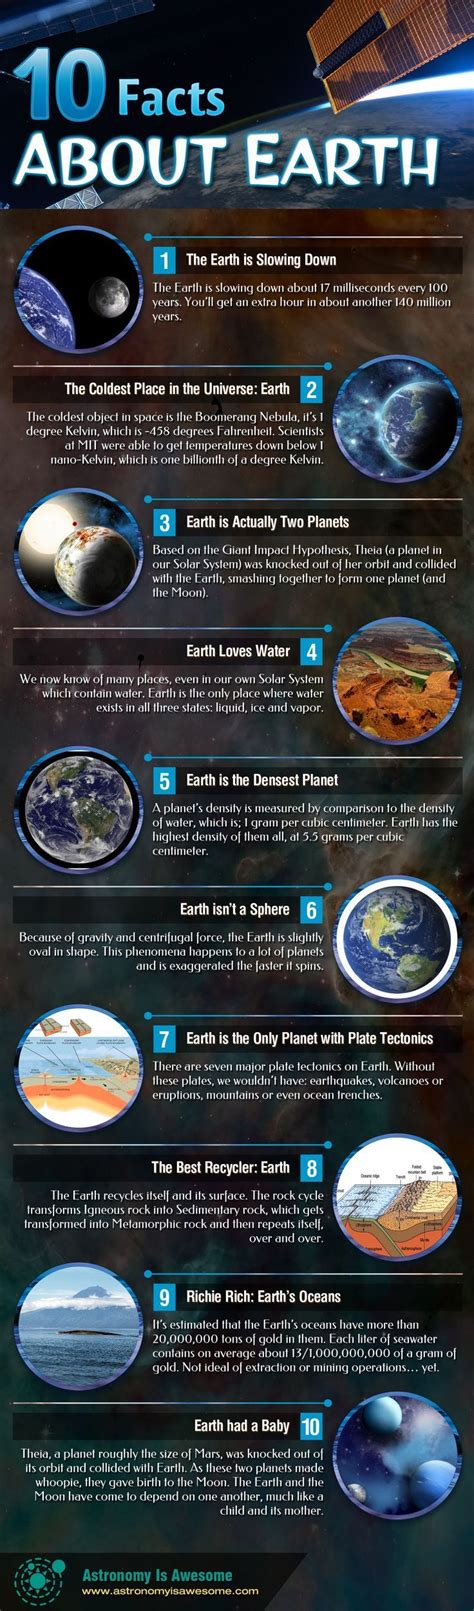 10 Facts About Earth Infographic Space Facts Earth Science Facts About Earth